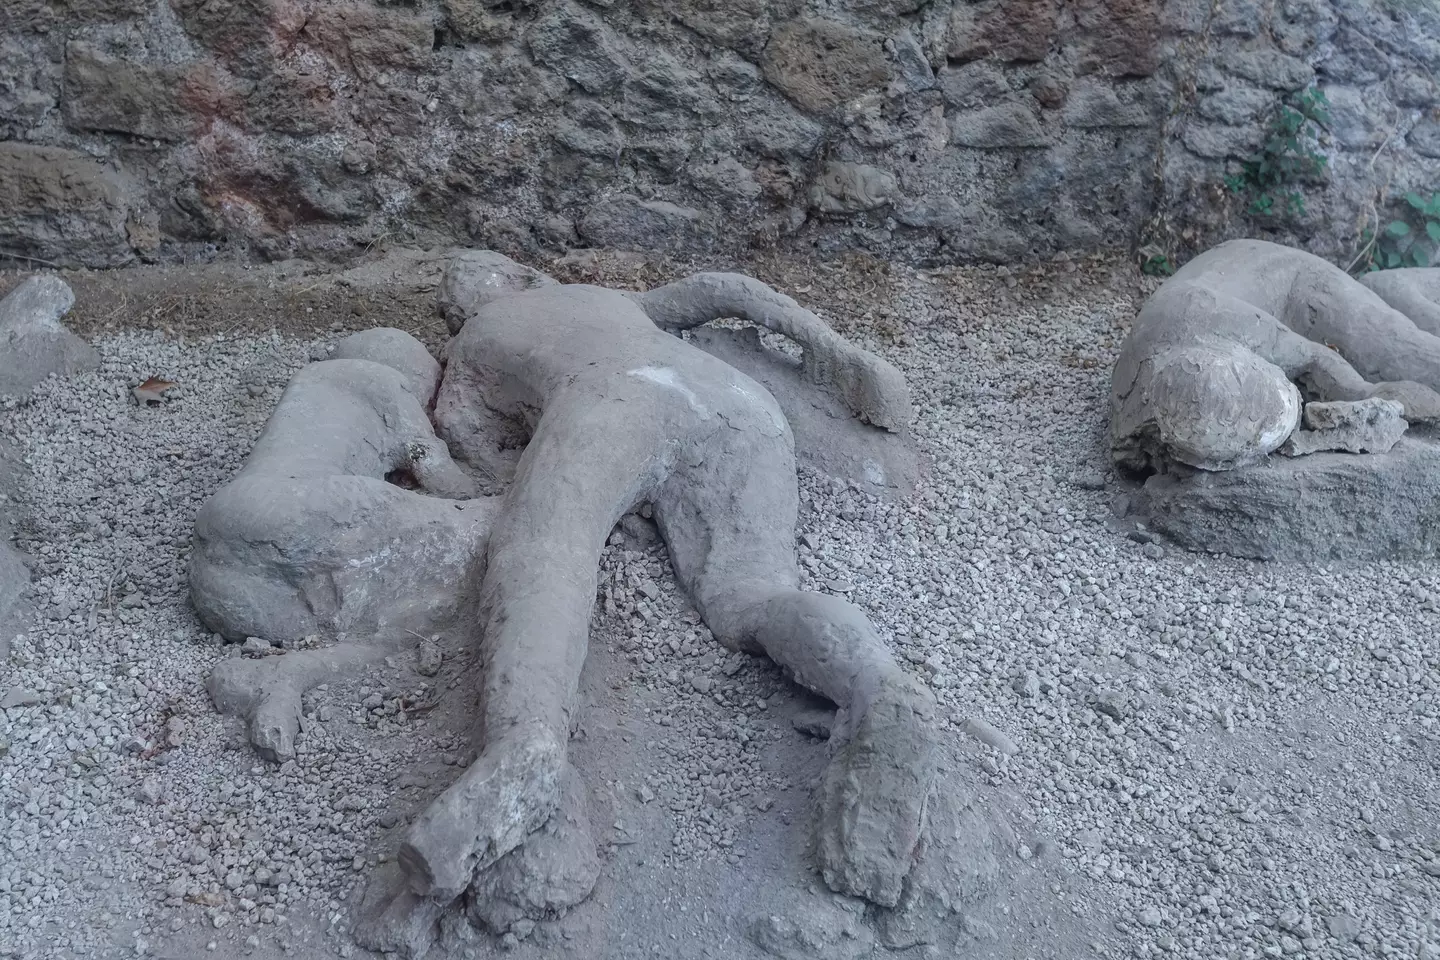 Victims  in Pompeii have literally been frozen in time after they were flash-heated to death.